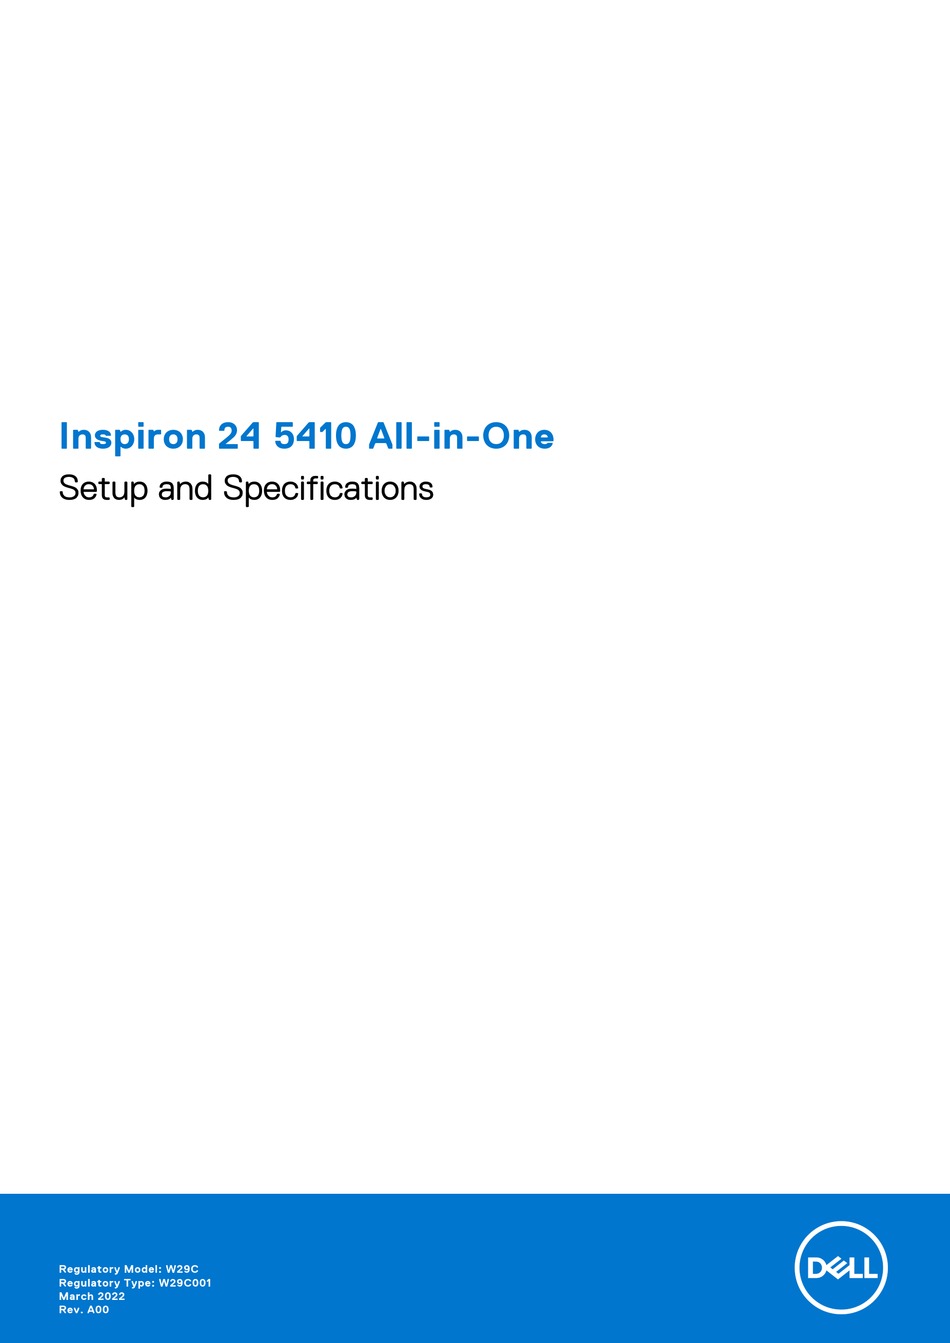 DELL INSPIRON 24 5410 ALL-IN-ONE SETUP AND SPECIFICATIONS Pdf Download |  ManualsLib